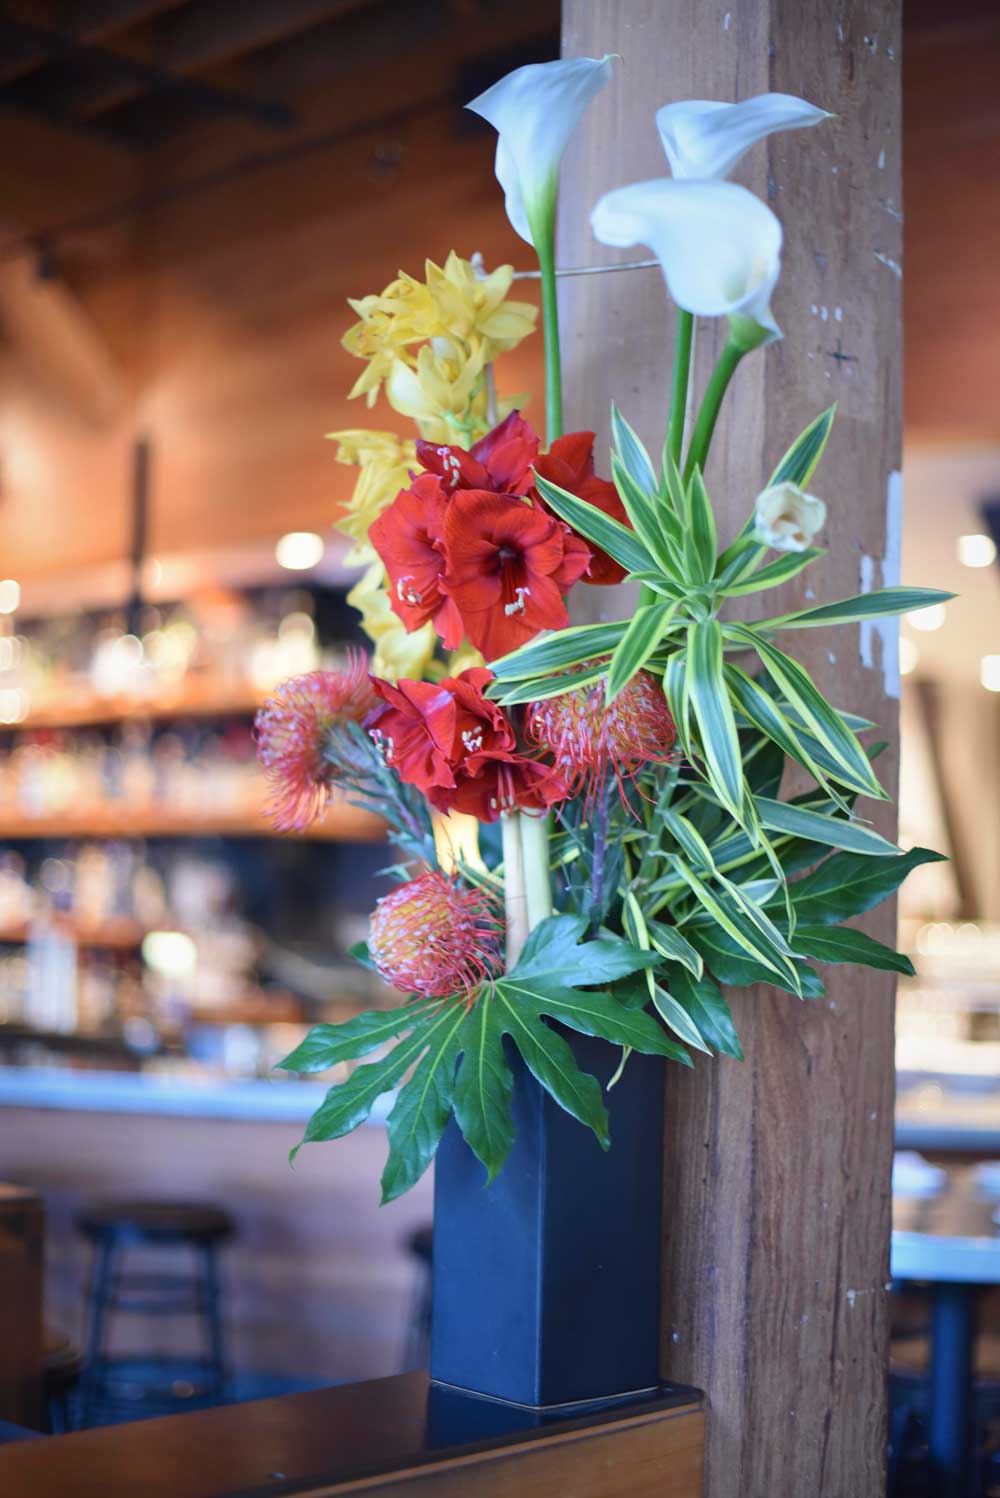 Fresh, bright flowers greet customers as they enter Boxing Room